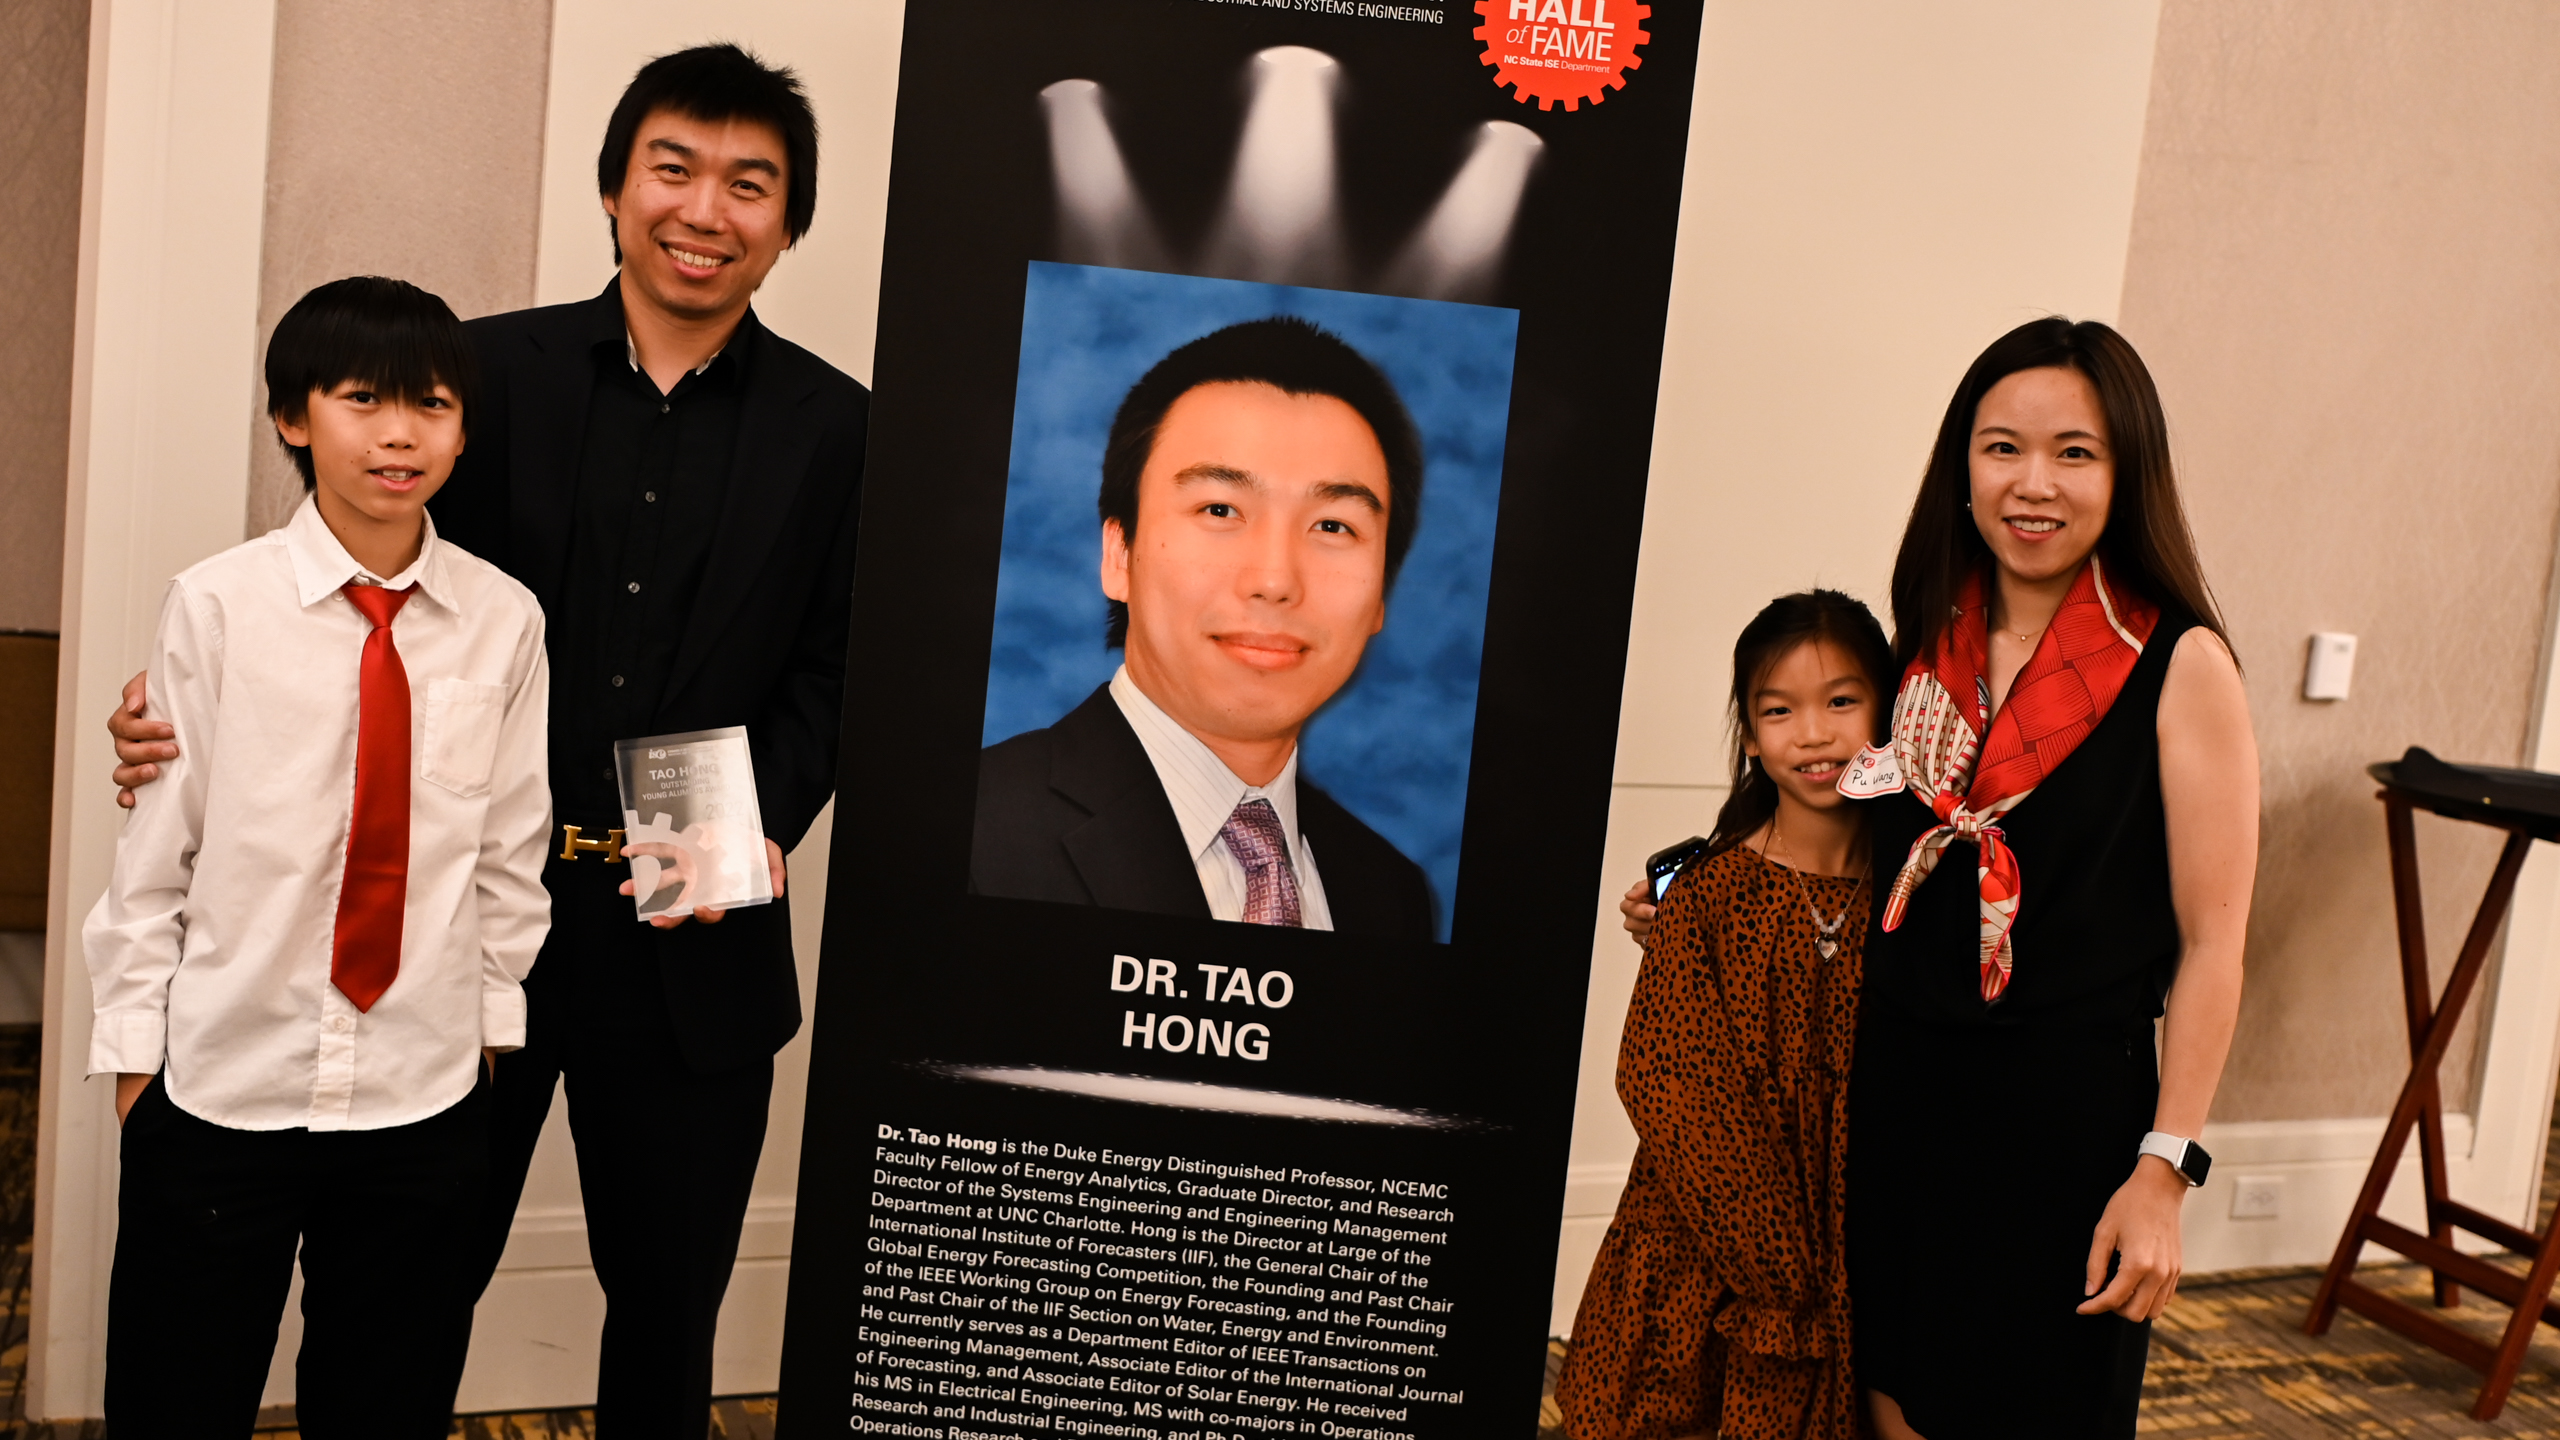 Dr. Tao Hong and his family posing in front of his Outstanding Young Alumni banner